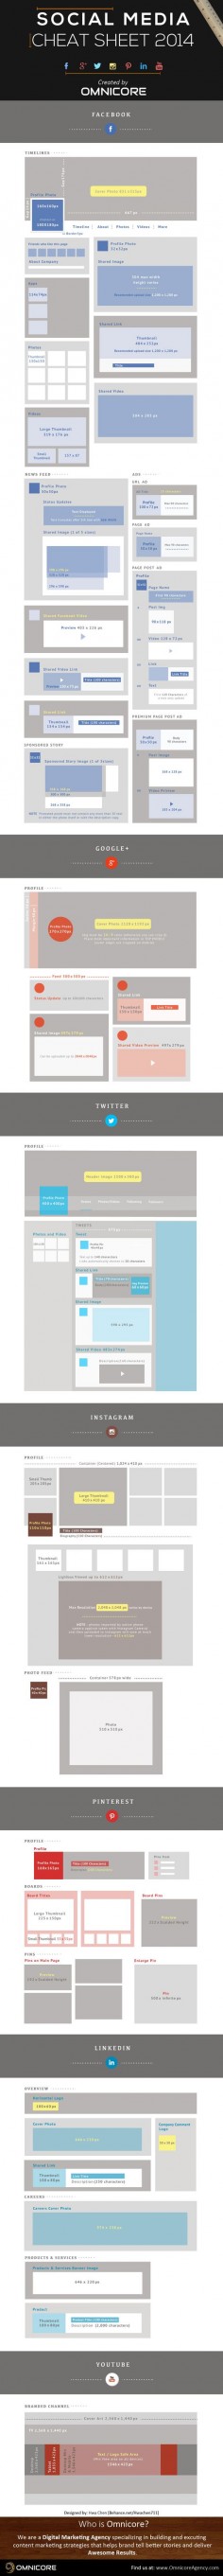 The Essential Social Media Design and Sizing Cheat Sheet